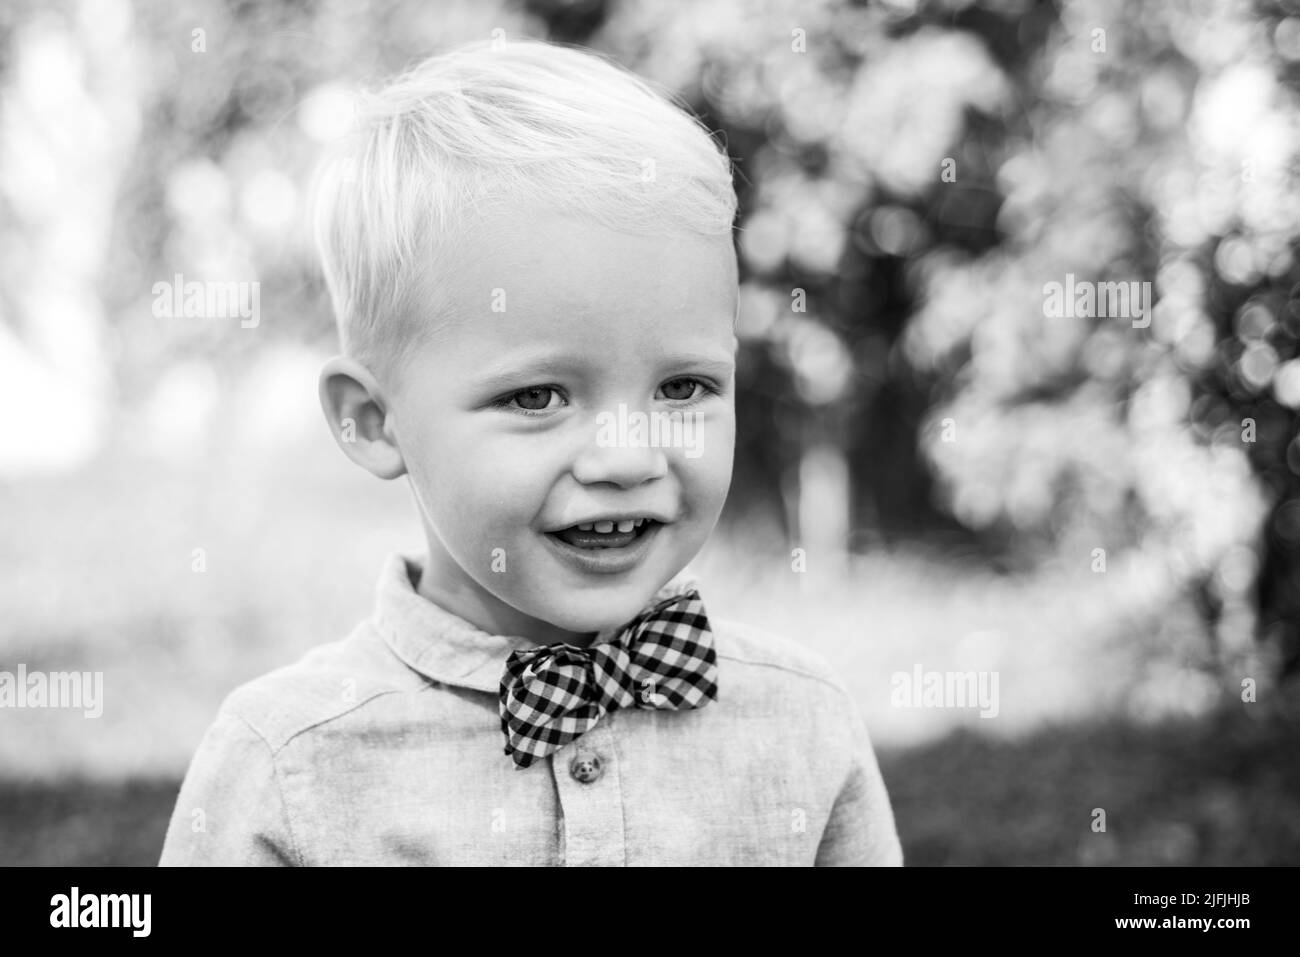 Has happy. International childrens day. Adorable baby having fun. Boy in suit and bowtie. Portrait of happy smiling child boy on nature background Stock Photo